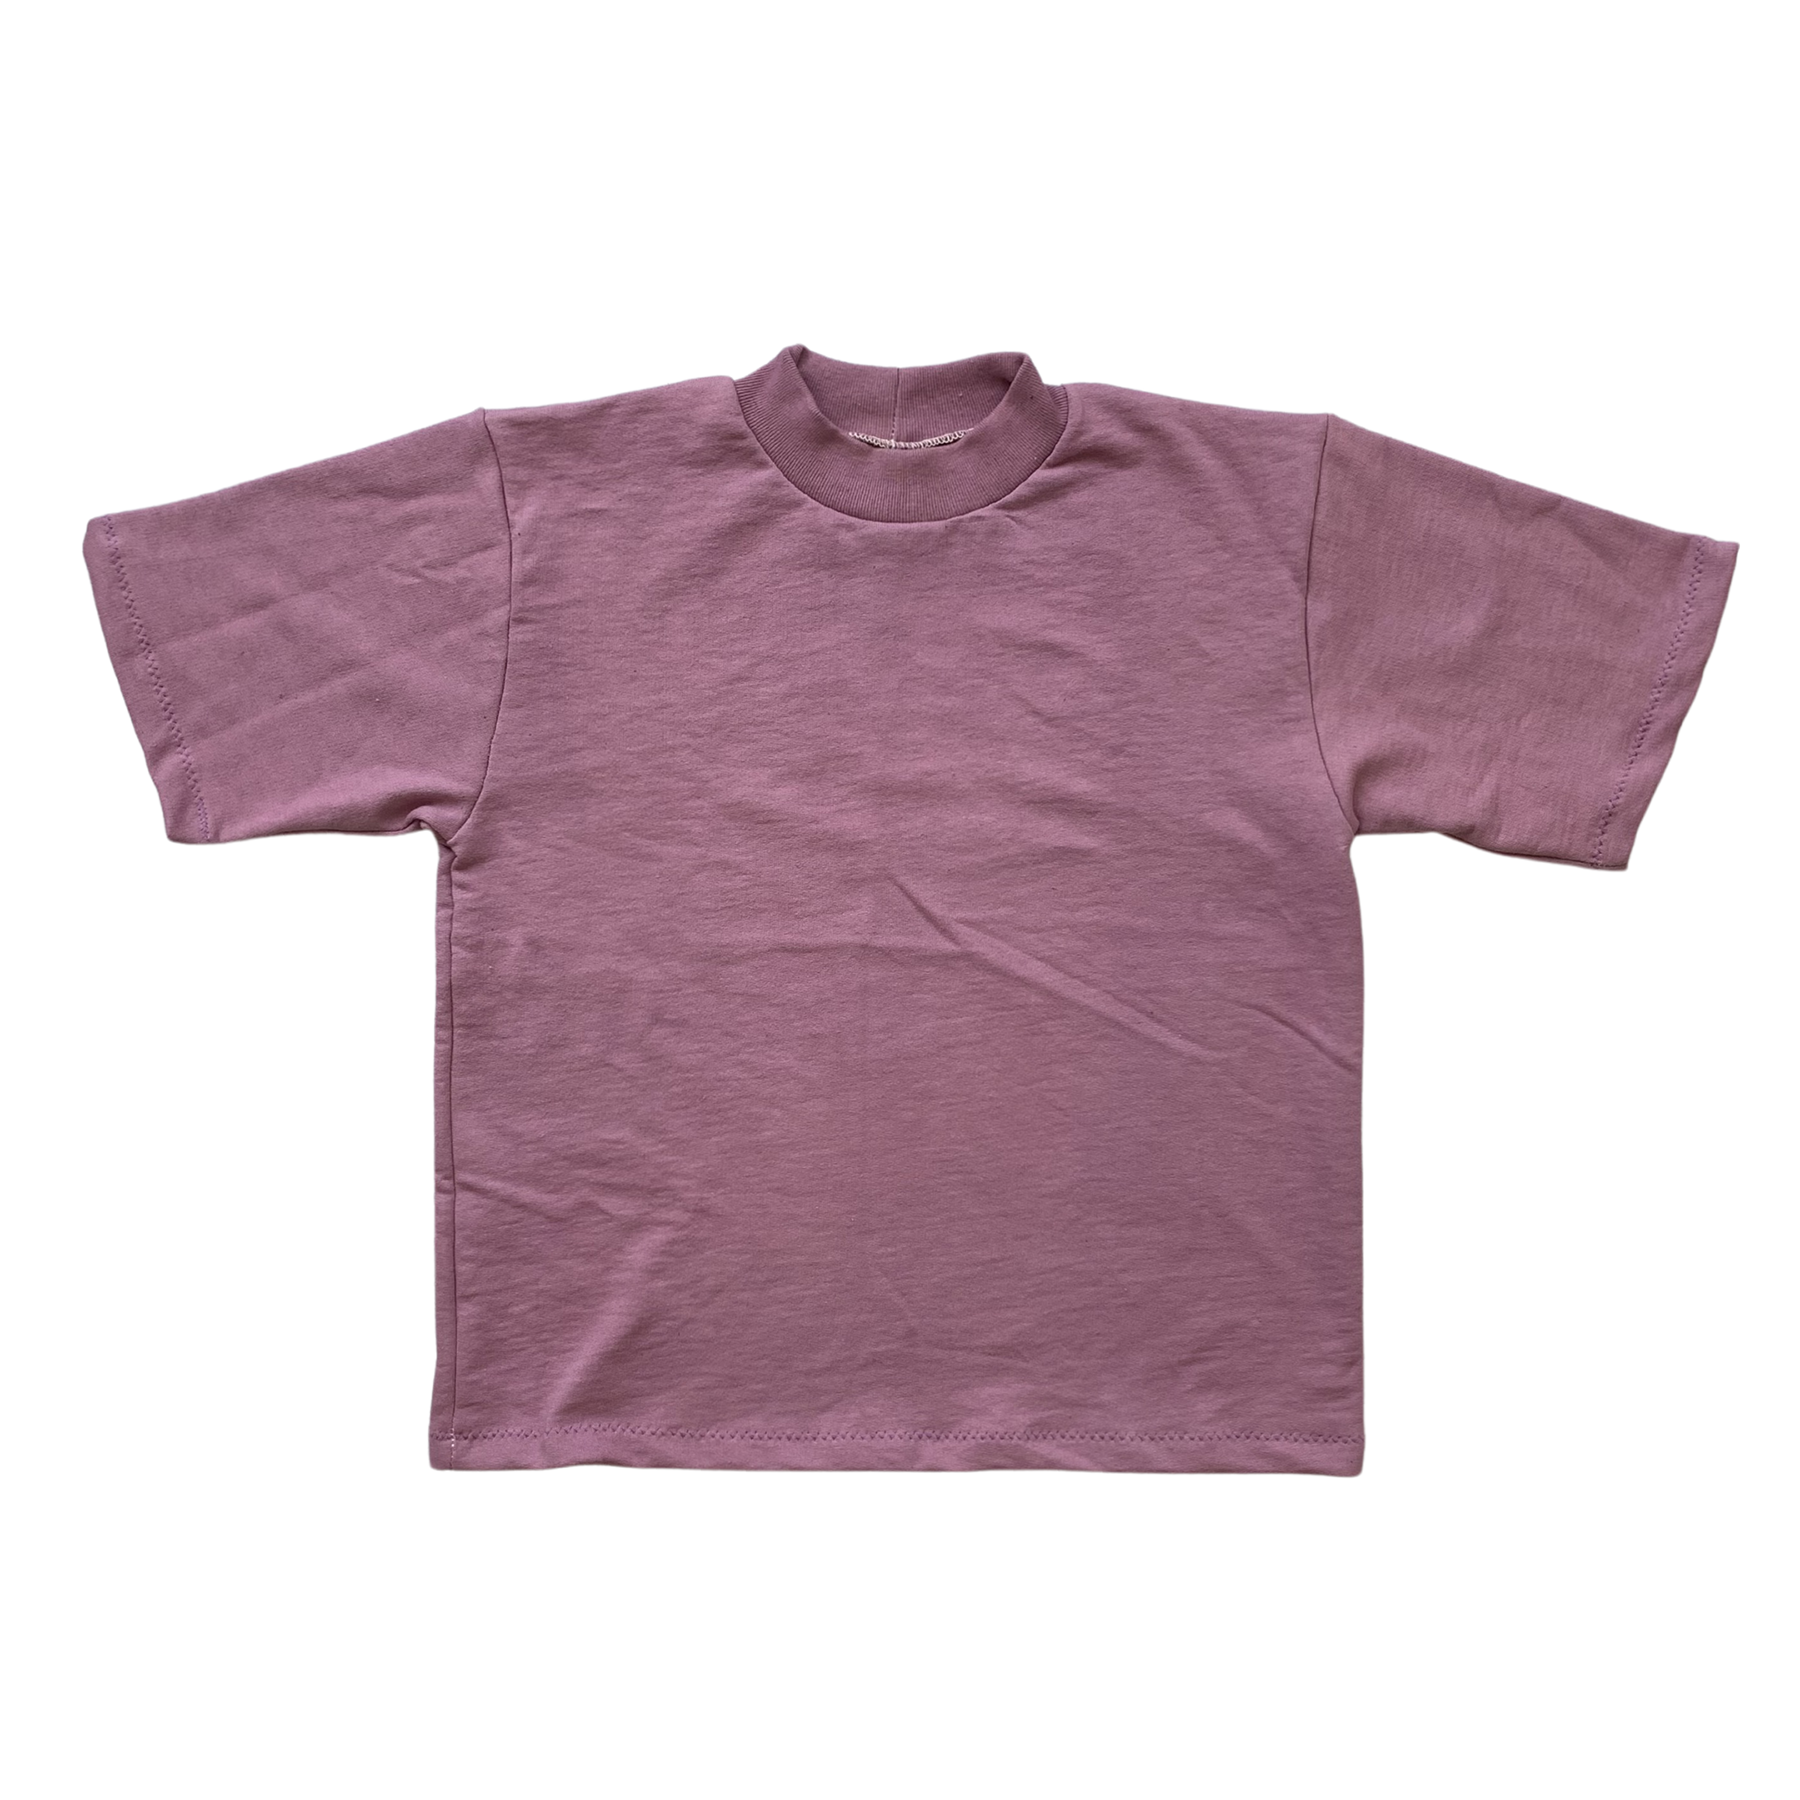 french terry heavy tee - organic usa cotton - S SHORT